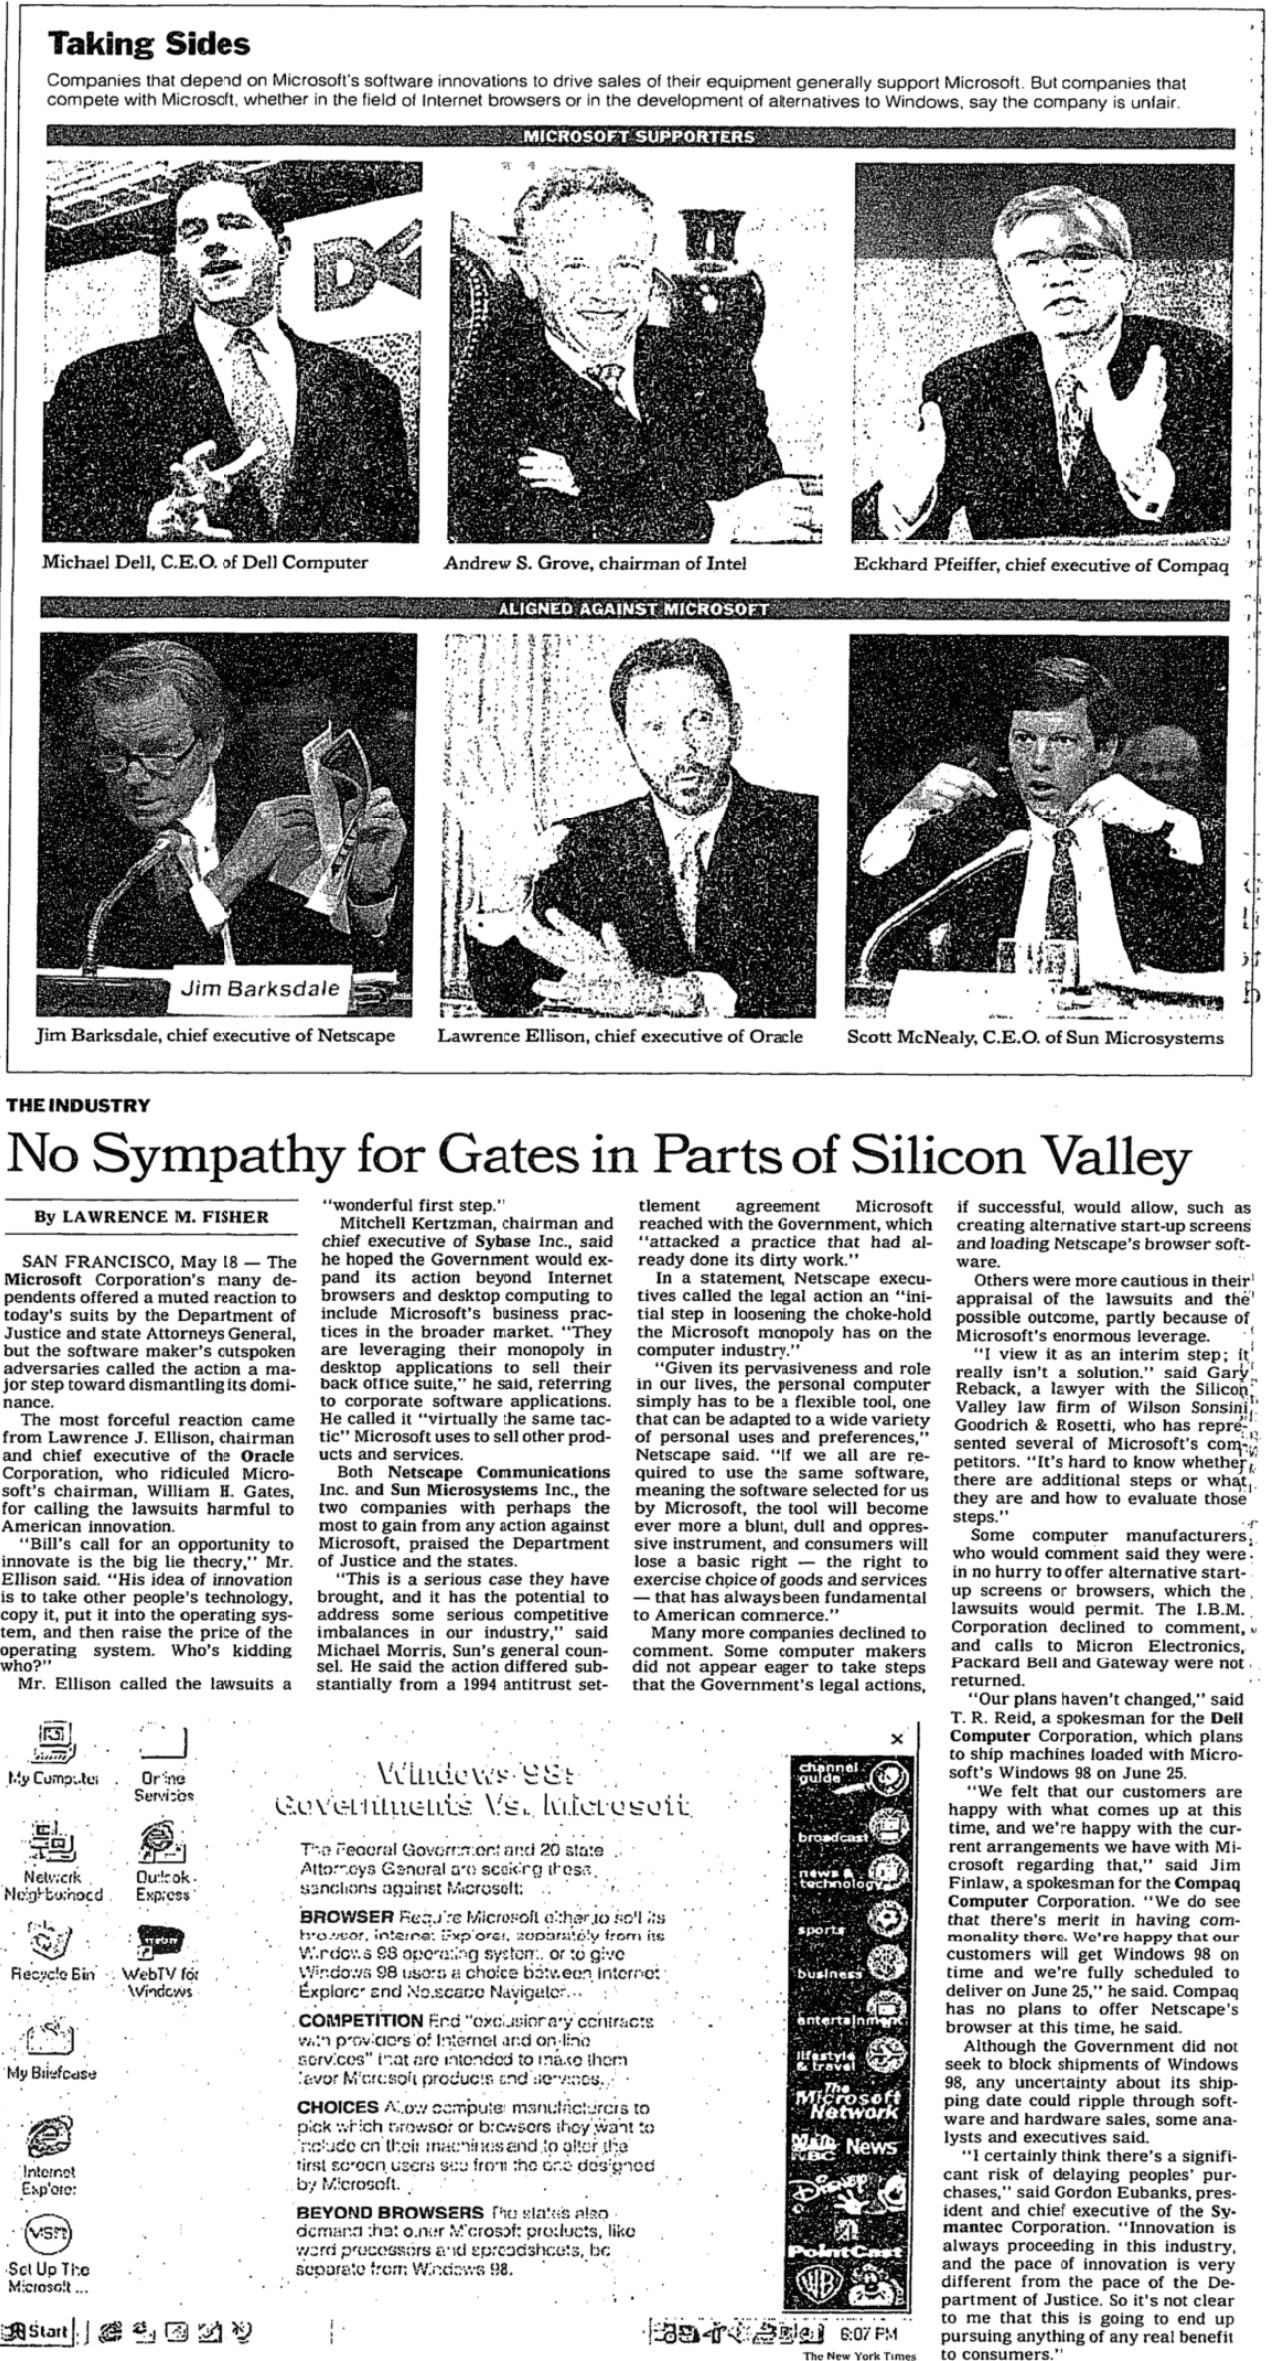 NY Times: "No Sympathy for Gates in Parts of Silicon Valley"